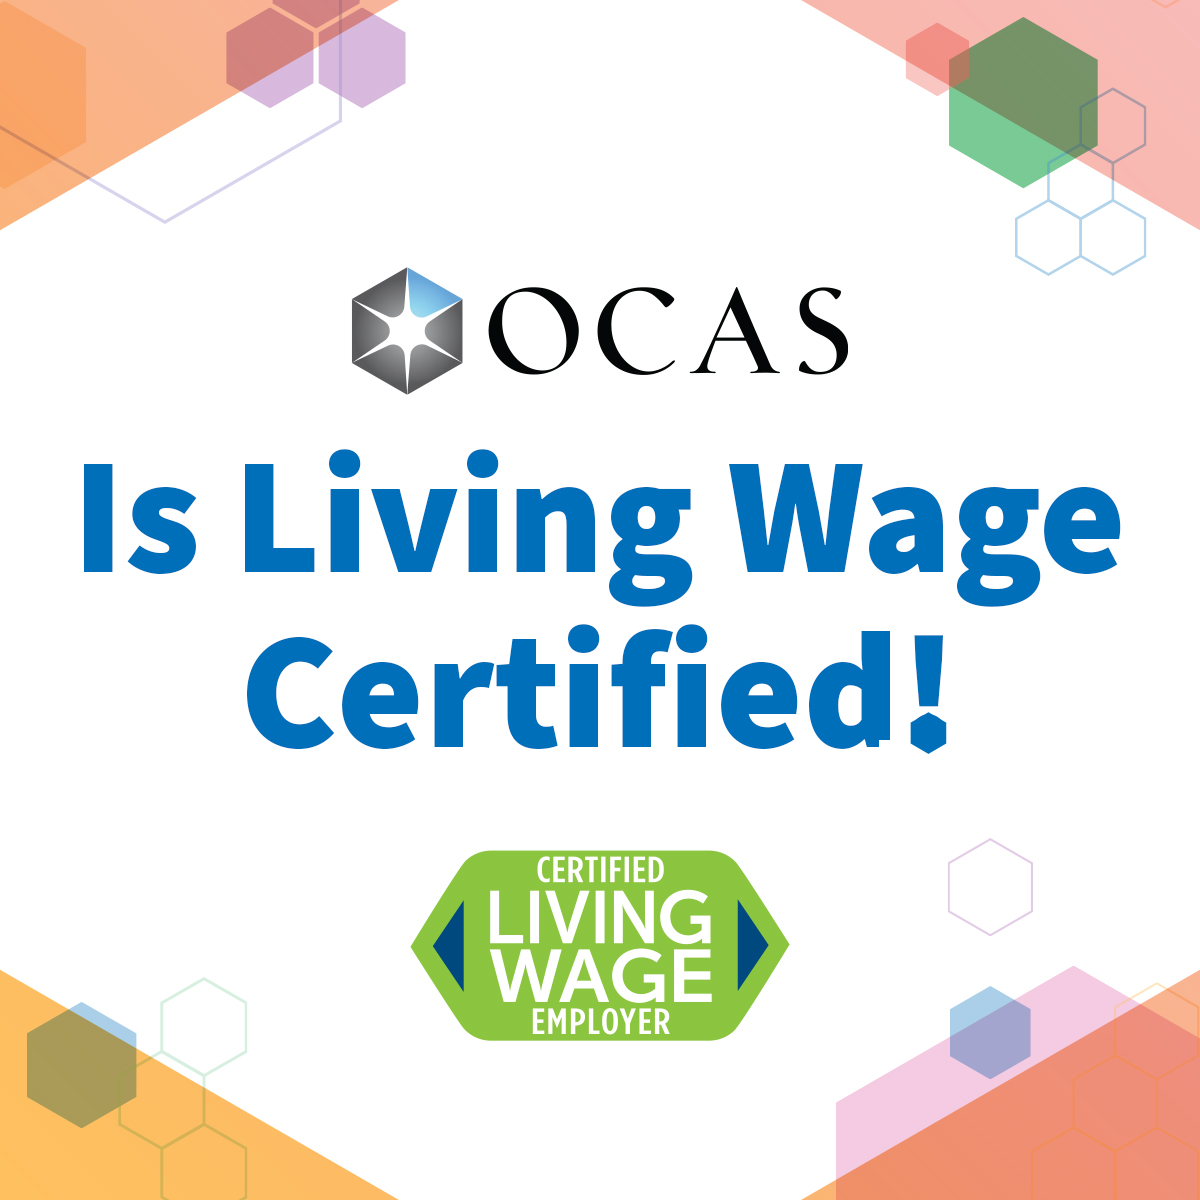 OCAS is proud to be a Certified Living Wage Employer! We believe paying a living wage shows our investment in our work colleagues. Studies show that being paid a living wage lowers stress and makes employees feel more appreciated. Learn about OCAS at ocas.ca